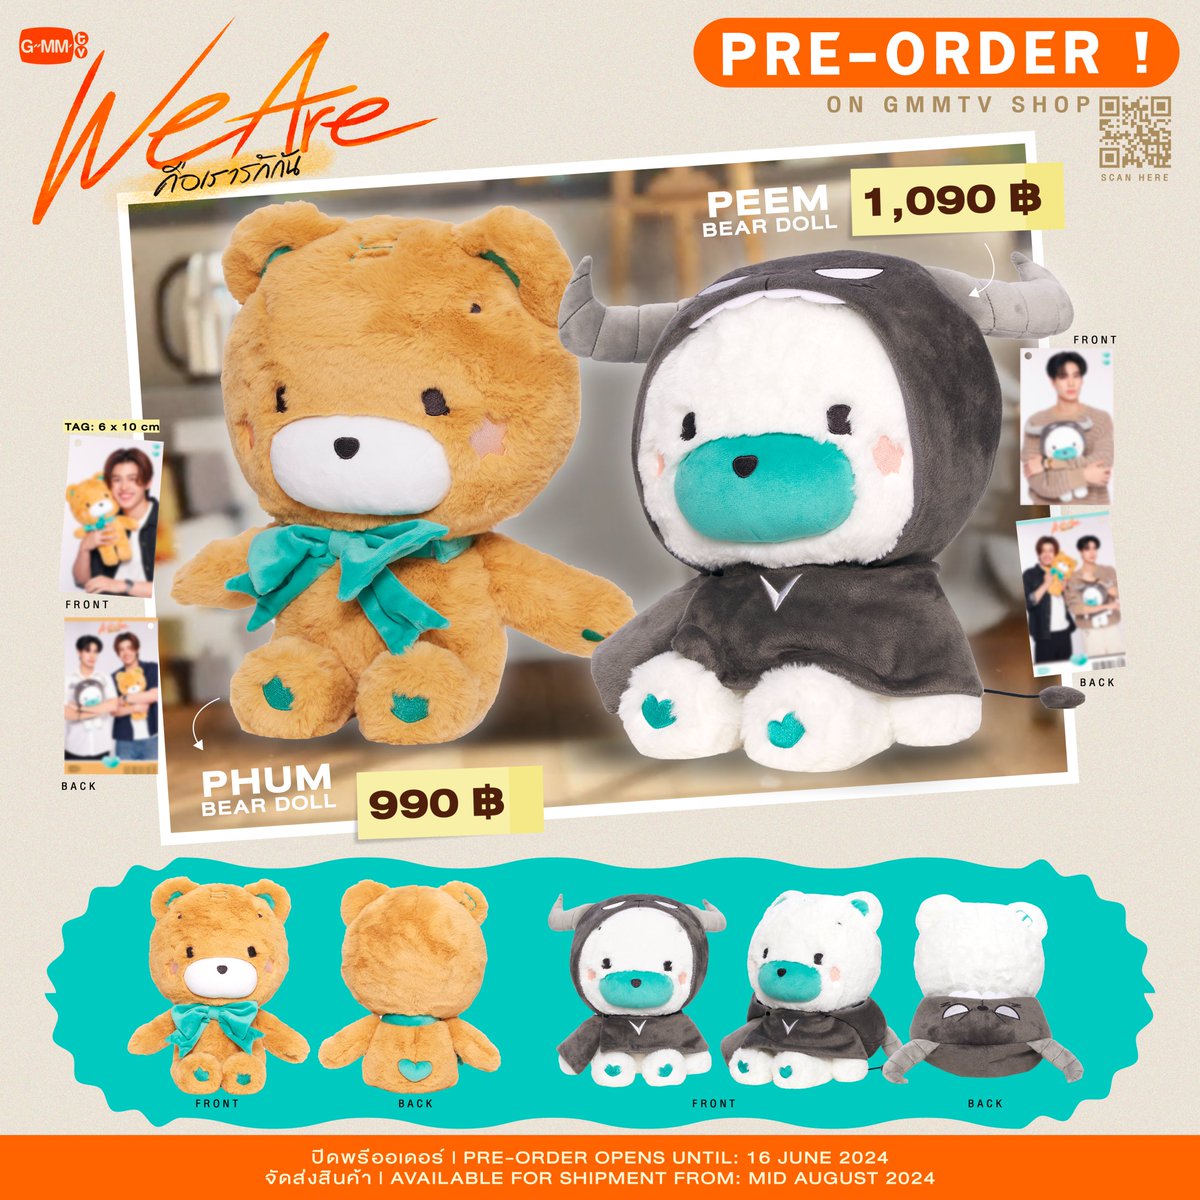 PRE-ORDER NOW! PHUM & PEEM BEAR DOLL | WE ARE คือเรารักกัน ON GMMTV SHOP

gmm-tv.com/shop/pre-order

Pre-order opens now until June 16, 2024.
All purchase orders will be shipped sequentially starting from mid August 2024.

#WeAreSeriesEP7
#GMMTV